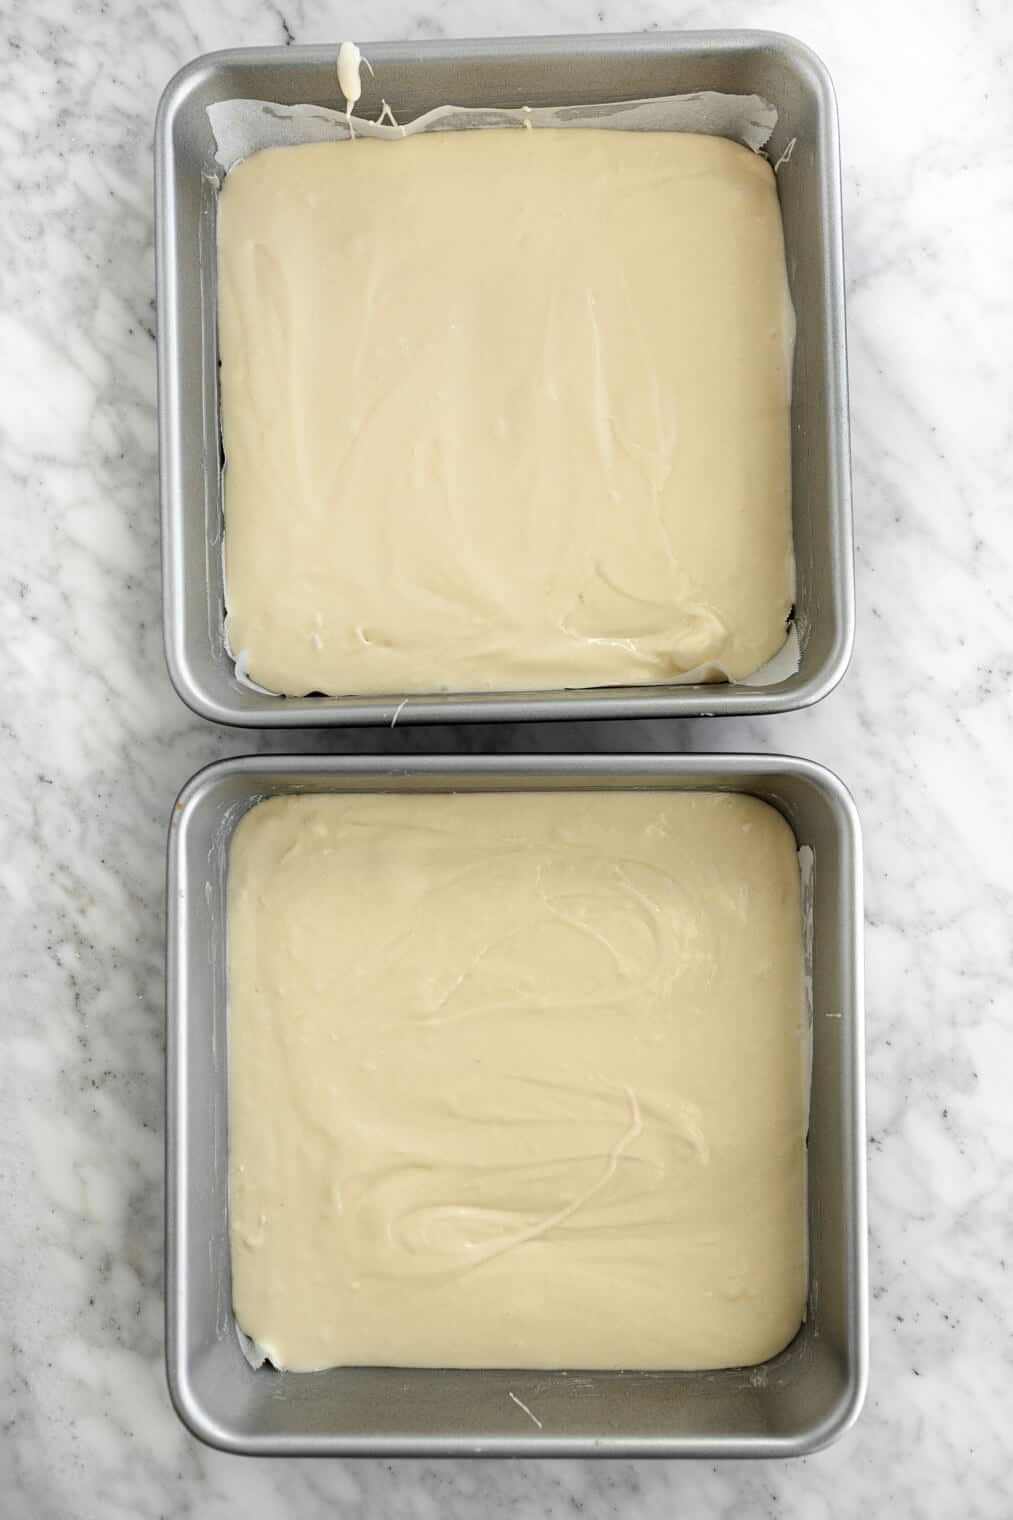 Cake mix in two square cake pans on a grey and white marble surface.